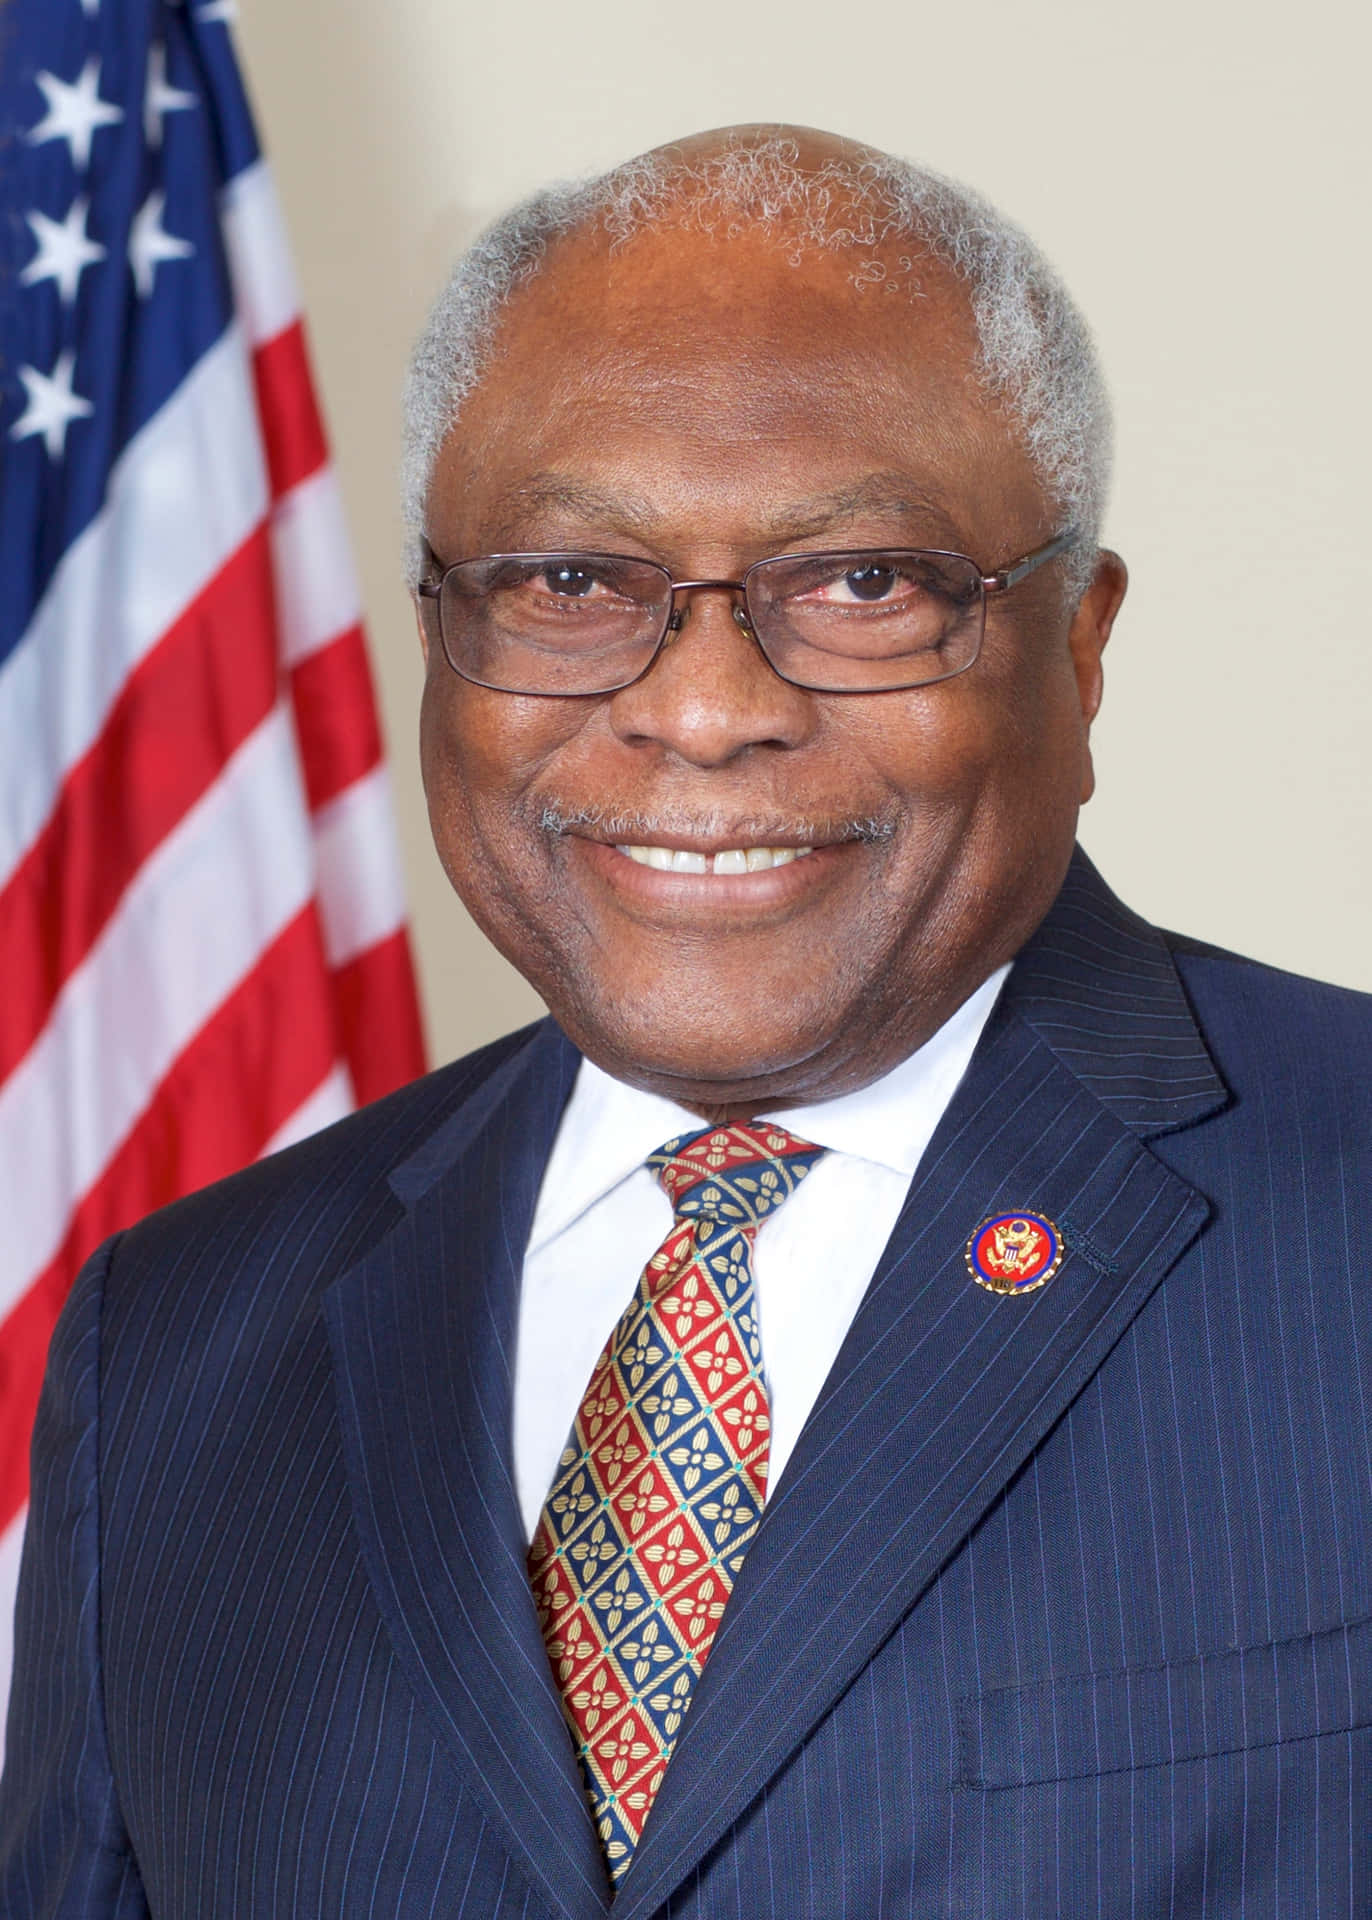 Jim Clyburn Smiling With American Flag Wallpaper